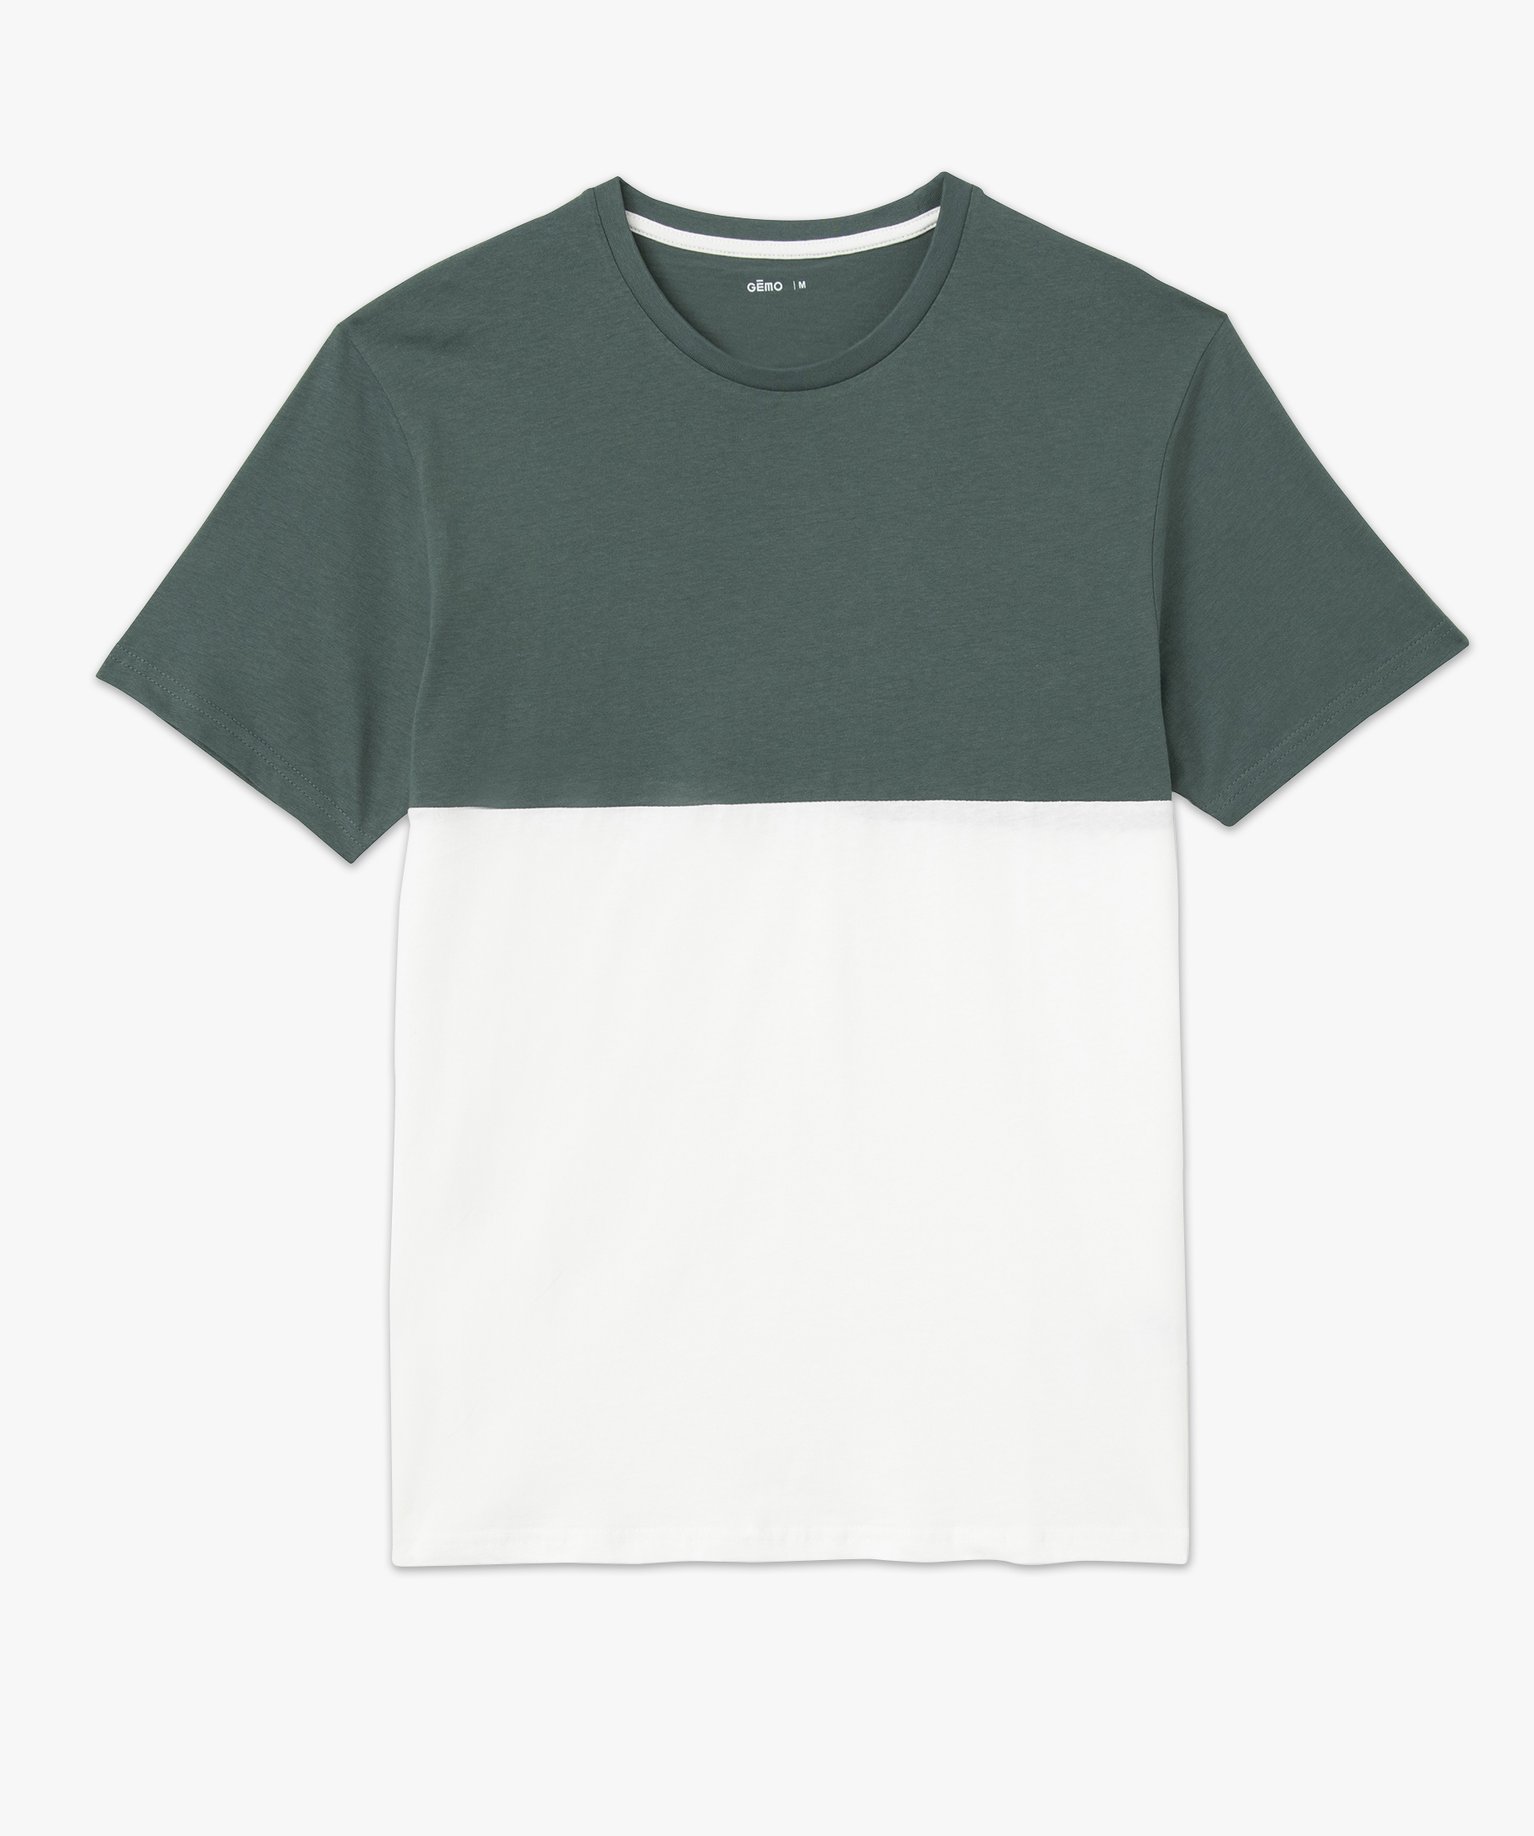 tee-shirt homme bicolore a manches courtes vert tee-shirts